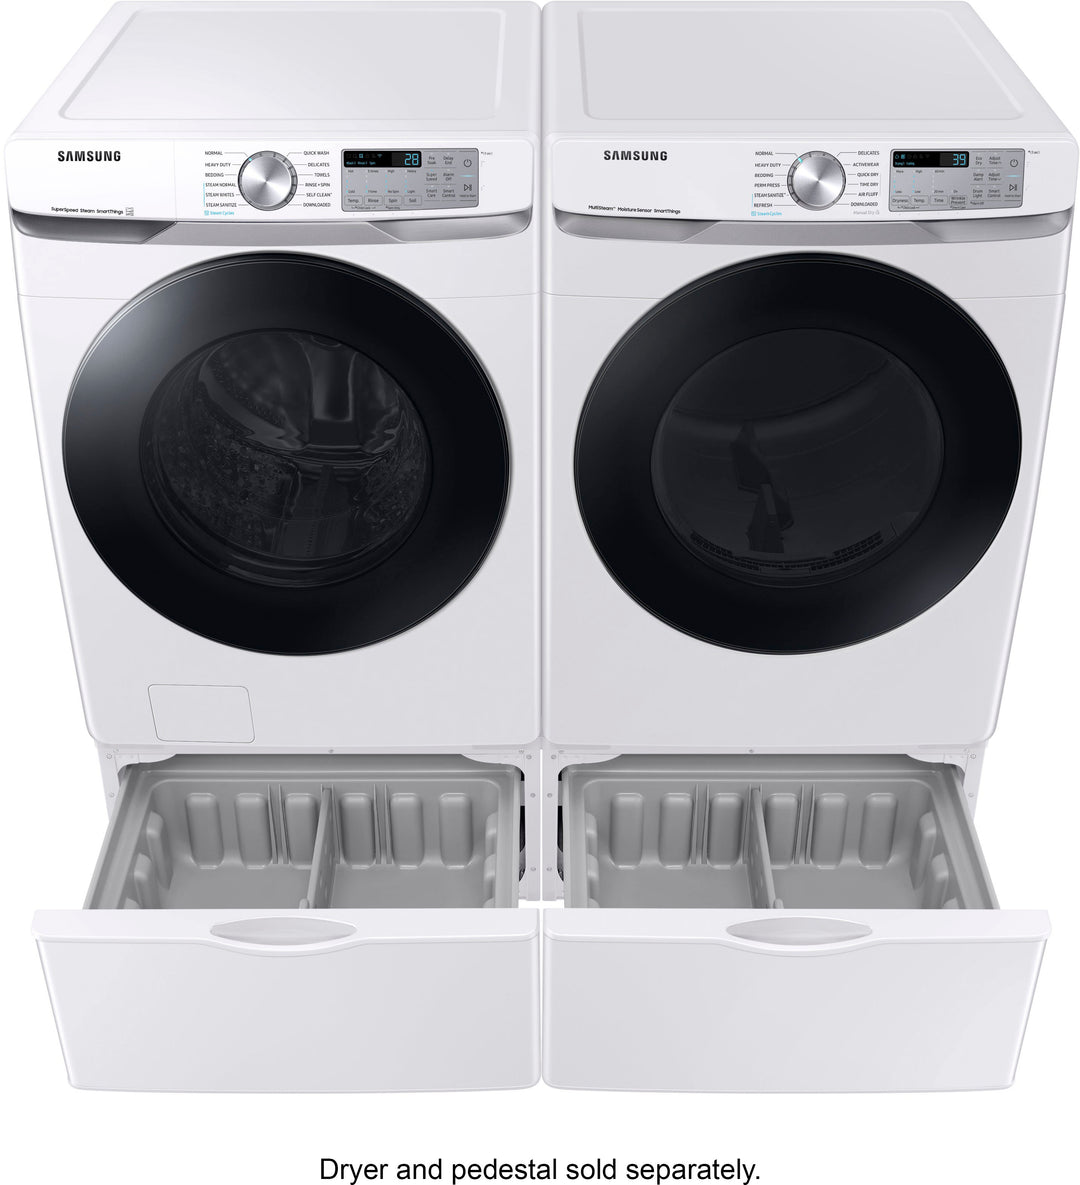 Samsung - 4.5 cu. ft. Large Capacity Smart Front Load Washer with Super Speed Wash - White_9